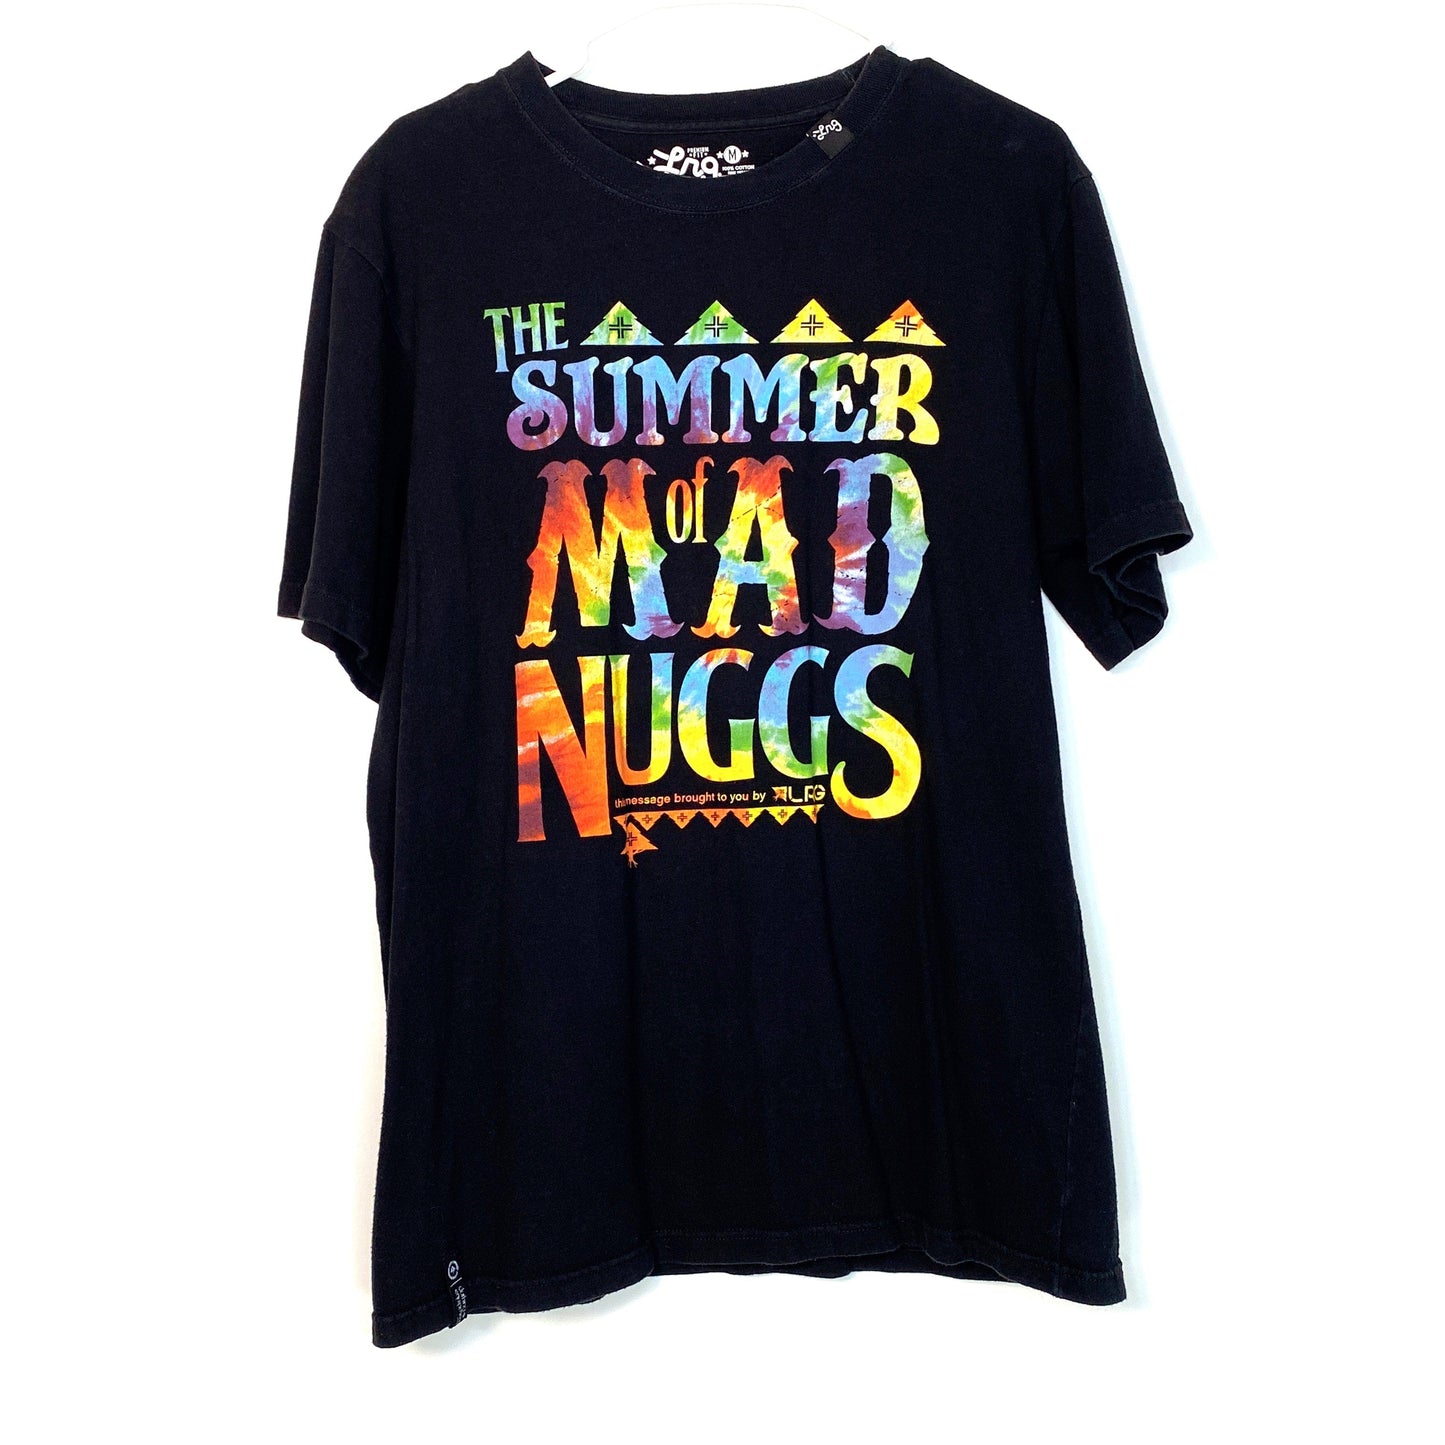 LRG Premium Fit Mens Size L Black Graphic T-Shirt “Summer of Mad Nuggs” S/s